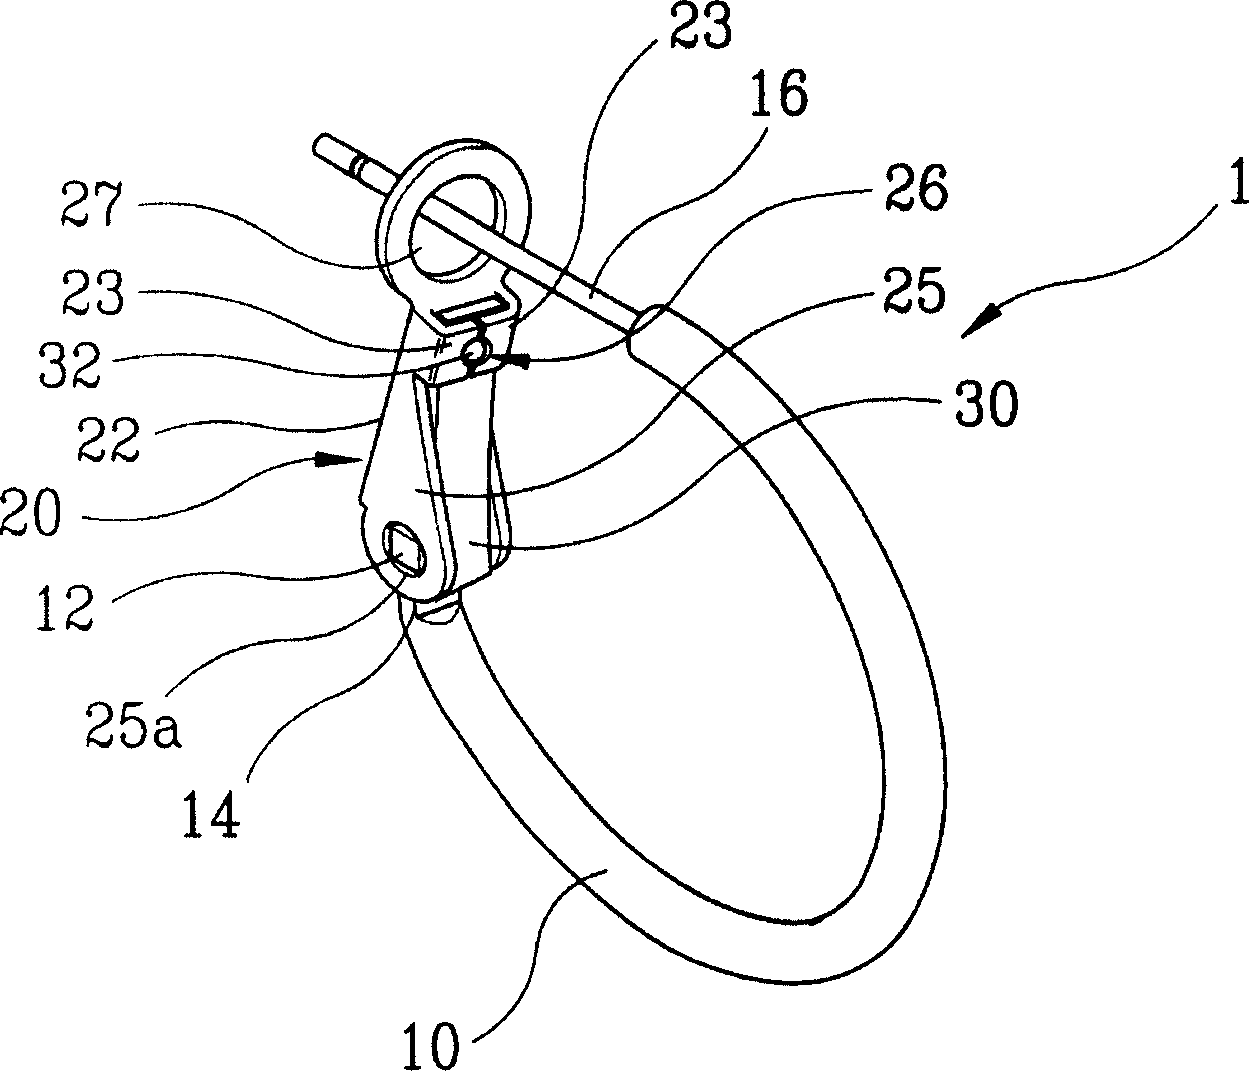 Tension locking device for ring